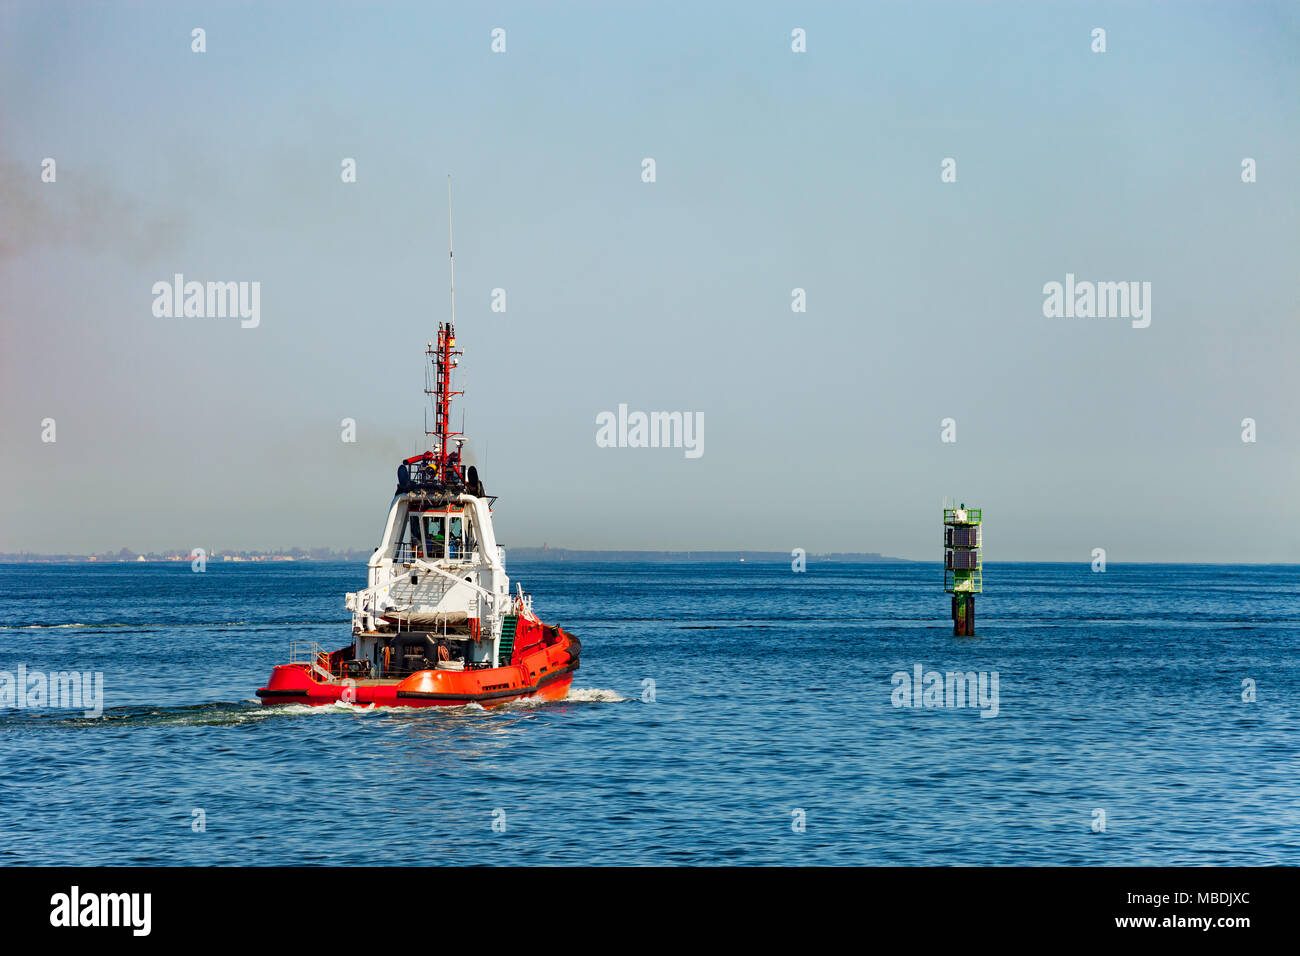 Tugboat and navigation mark on the shipping lane. Stock Photo